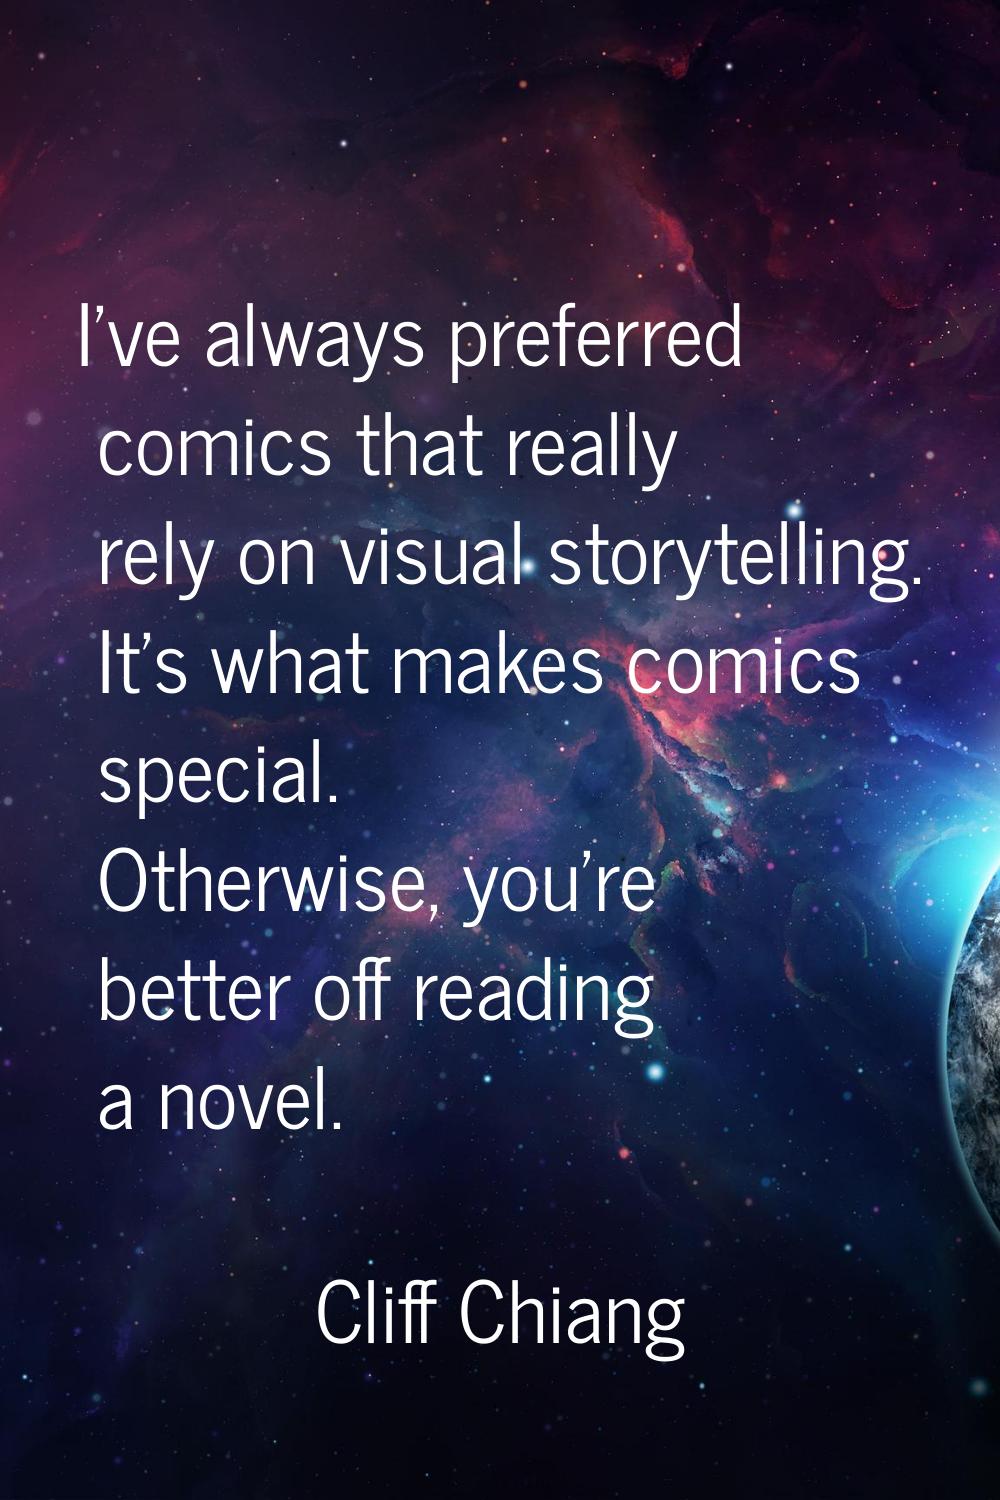 I've always preferred comics that really rely on visual storytelling. It's what makes comics specia